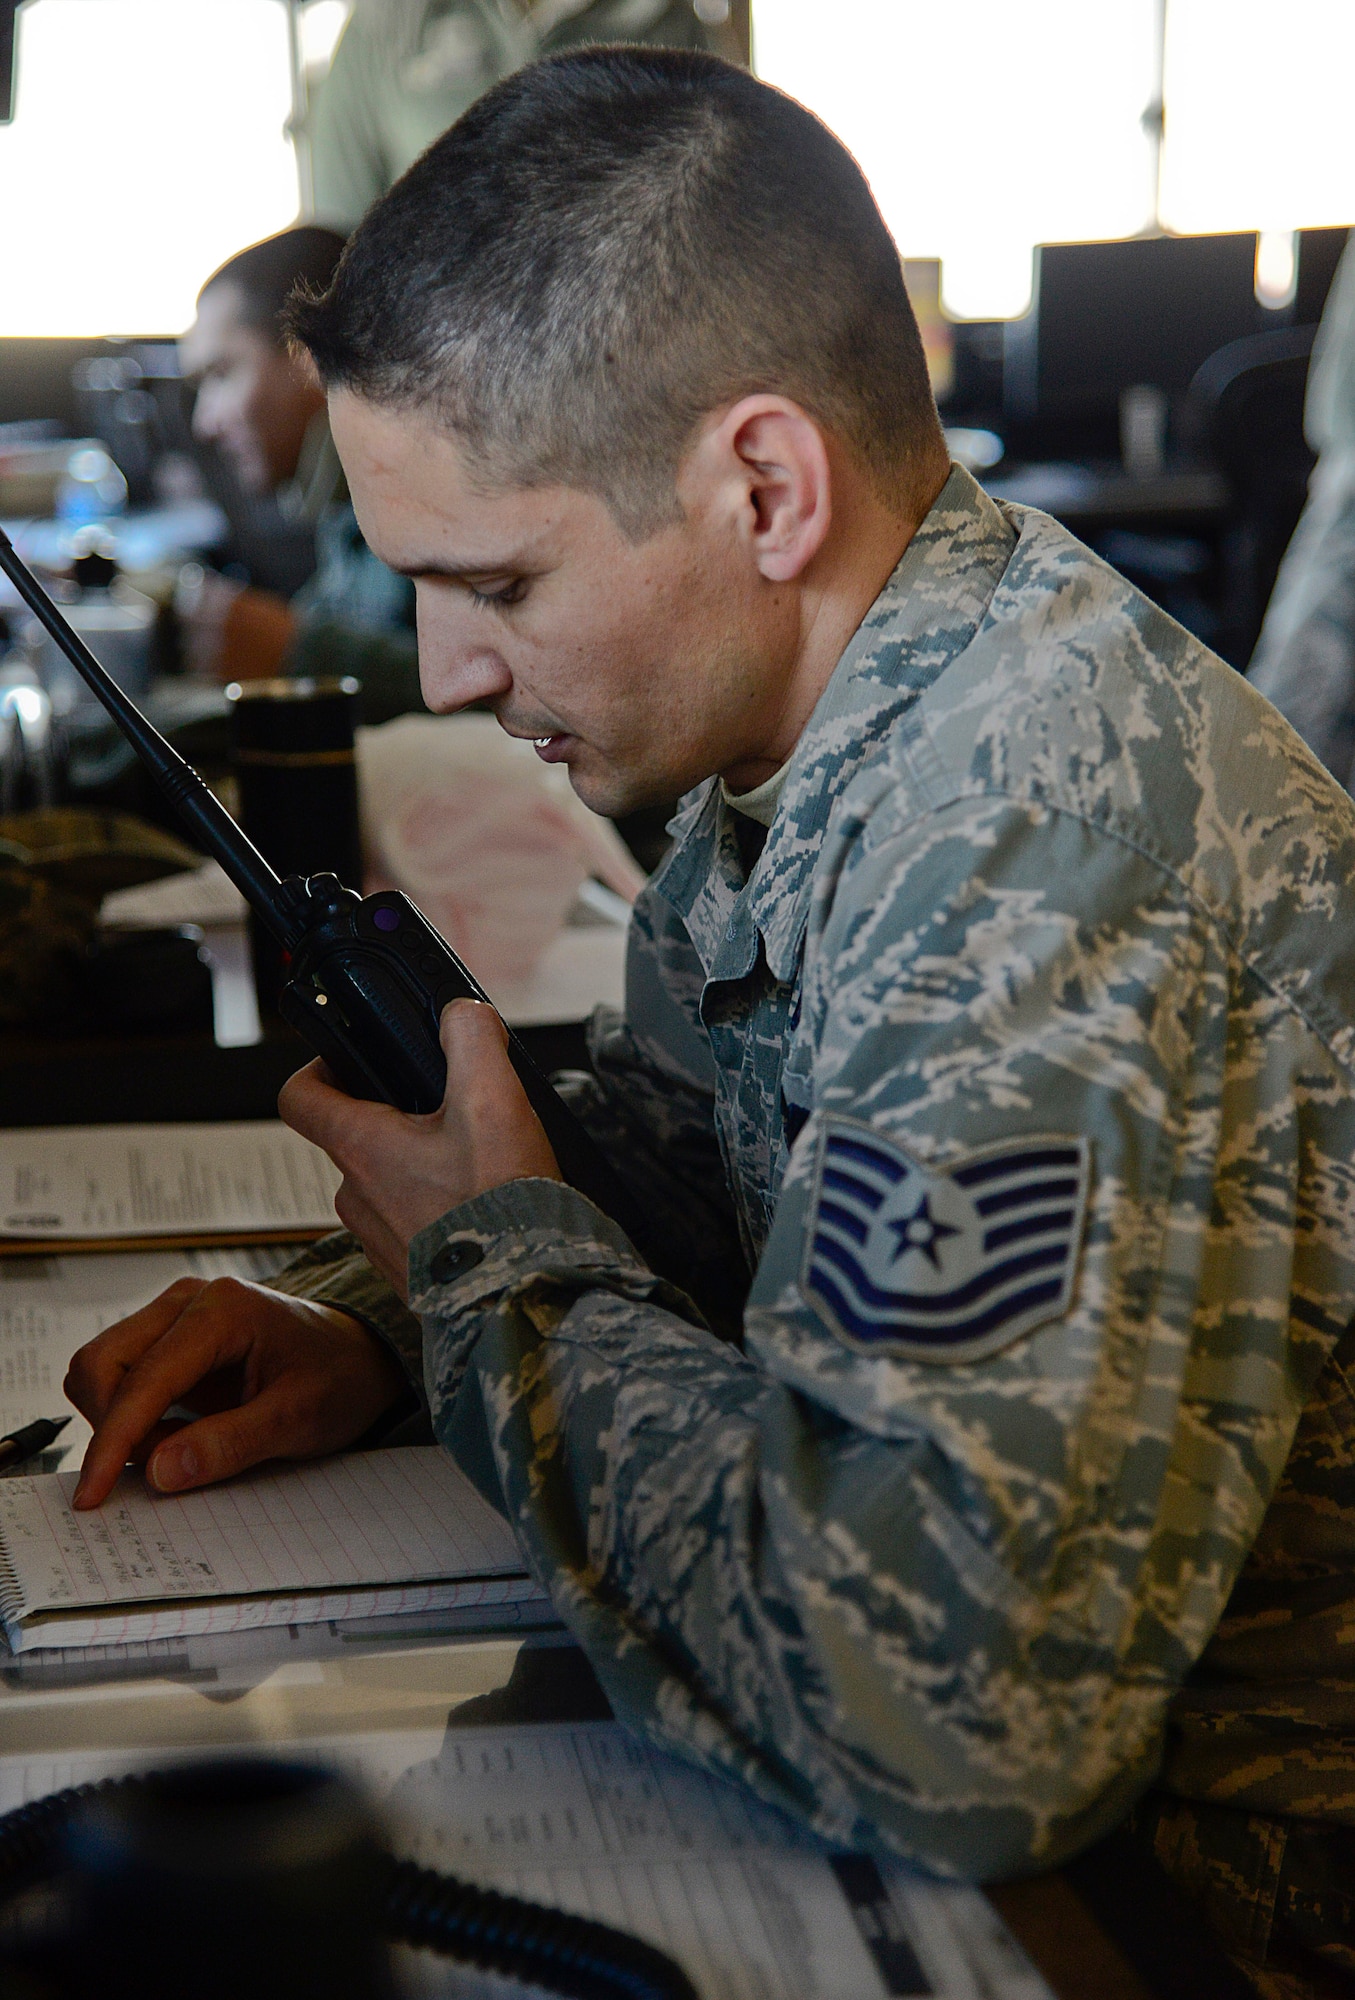 Tech. Sgt. Joaquin Camacho, 731st Air Mobility Squadron Air Terminal Operations Center senior controller, radios information to ground personnel at Osan Air Base, Republic of Korea, Feb. 1, 2016. The ATOC Airmen are responsible for continuously monitoring airlift missions and providing updates to the other sections within the 731st AMS. (U.S. Air Force photo by Senior Airman Kristin High/Released)